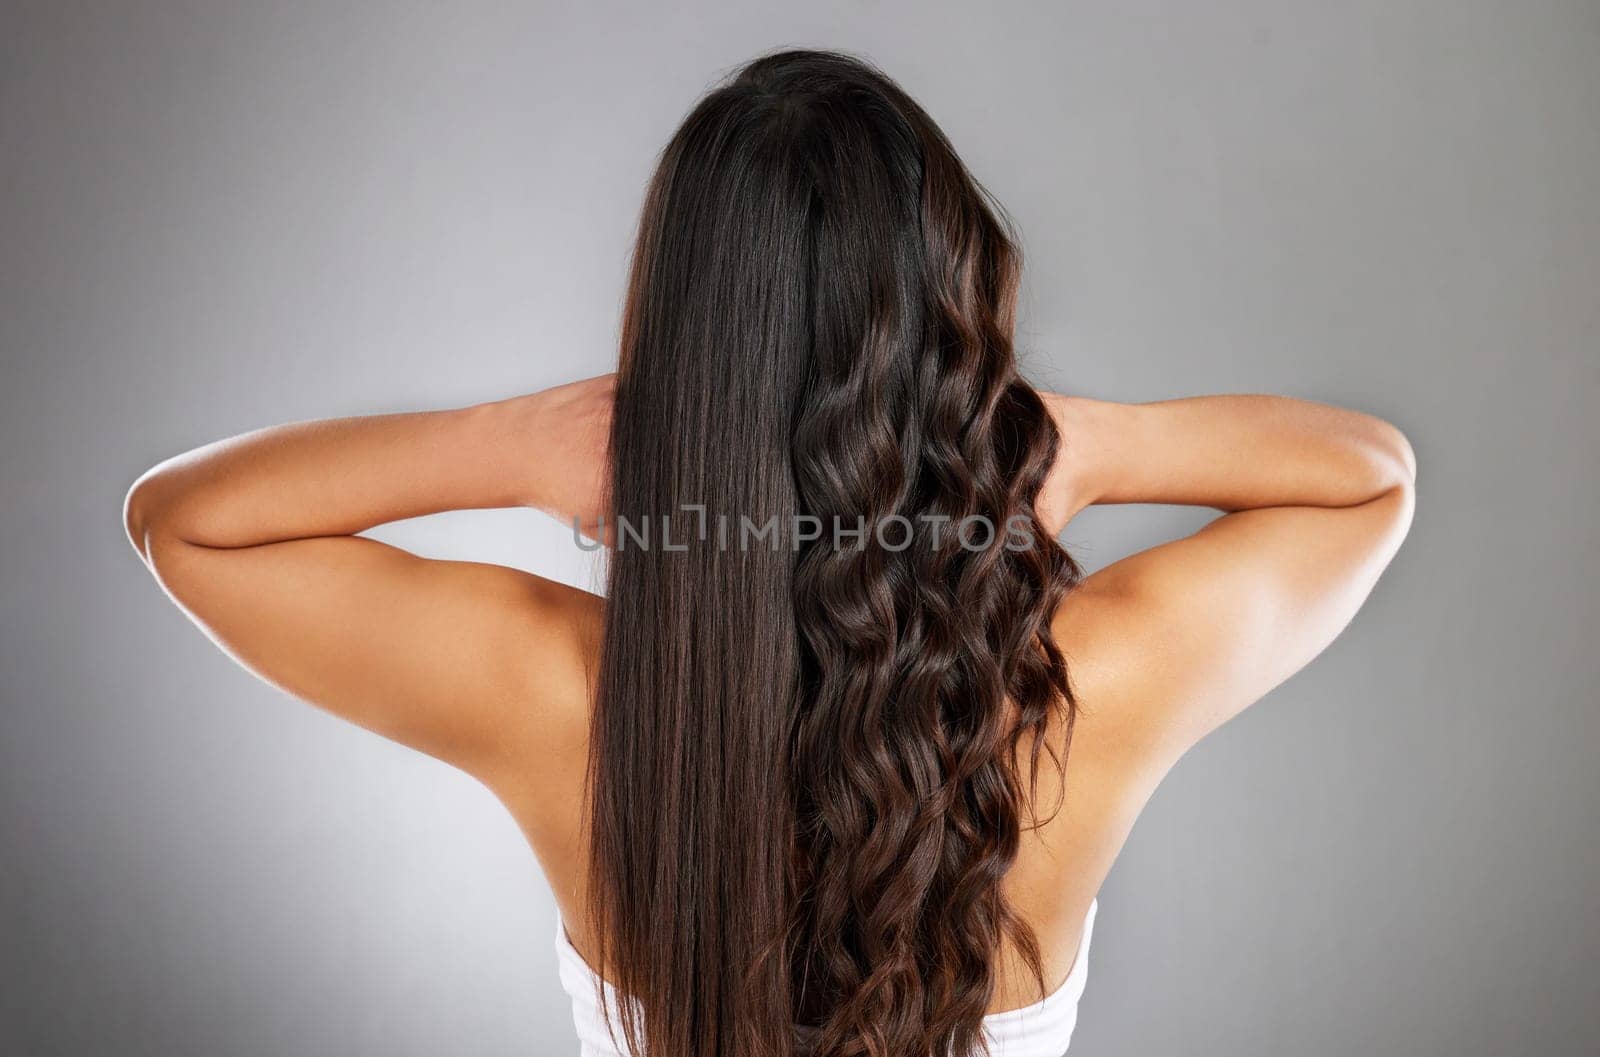 Woman back, curly or straight hairstyle on gray studio background for keratin treatment marketing, waves product advertising or grooming. Model, brunette color or healthy growth texture in wellness.